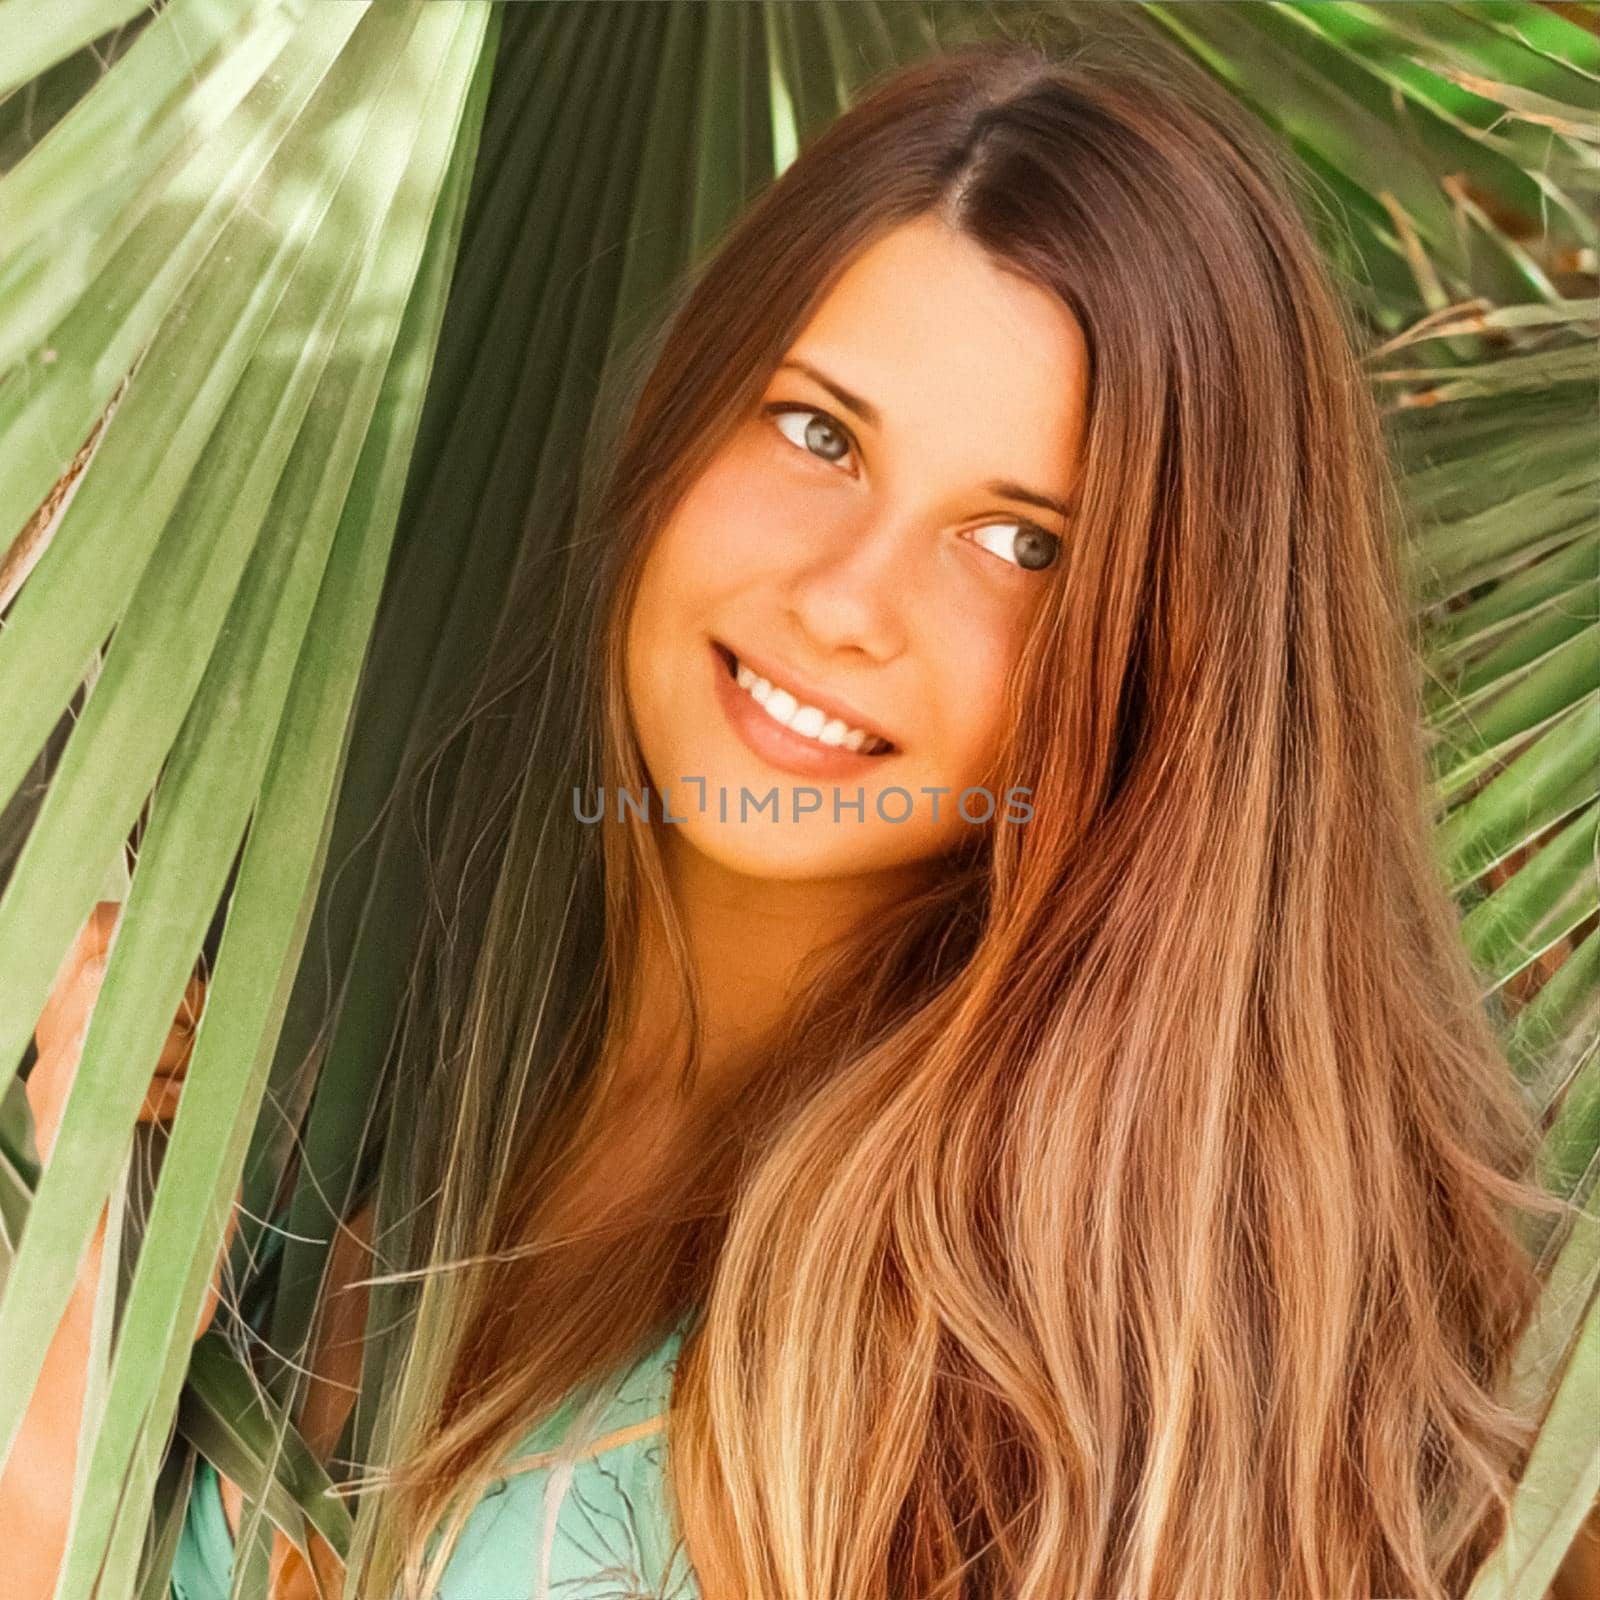 Hairstyle, beauty and summer portrait. Beautiful young woman with long dark hair, happy brunette smiling, tropical palm tree leaves on background.